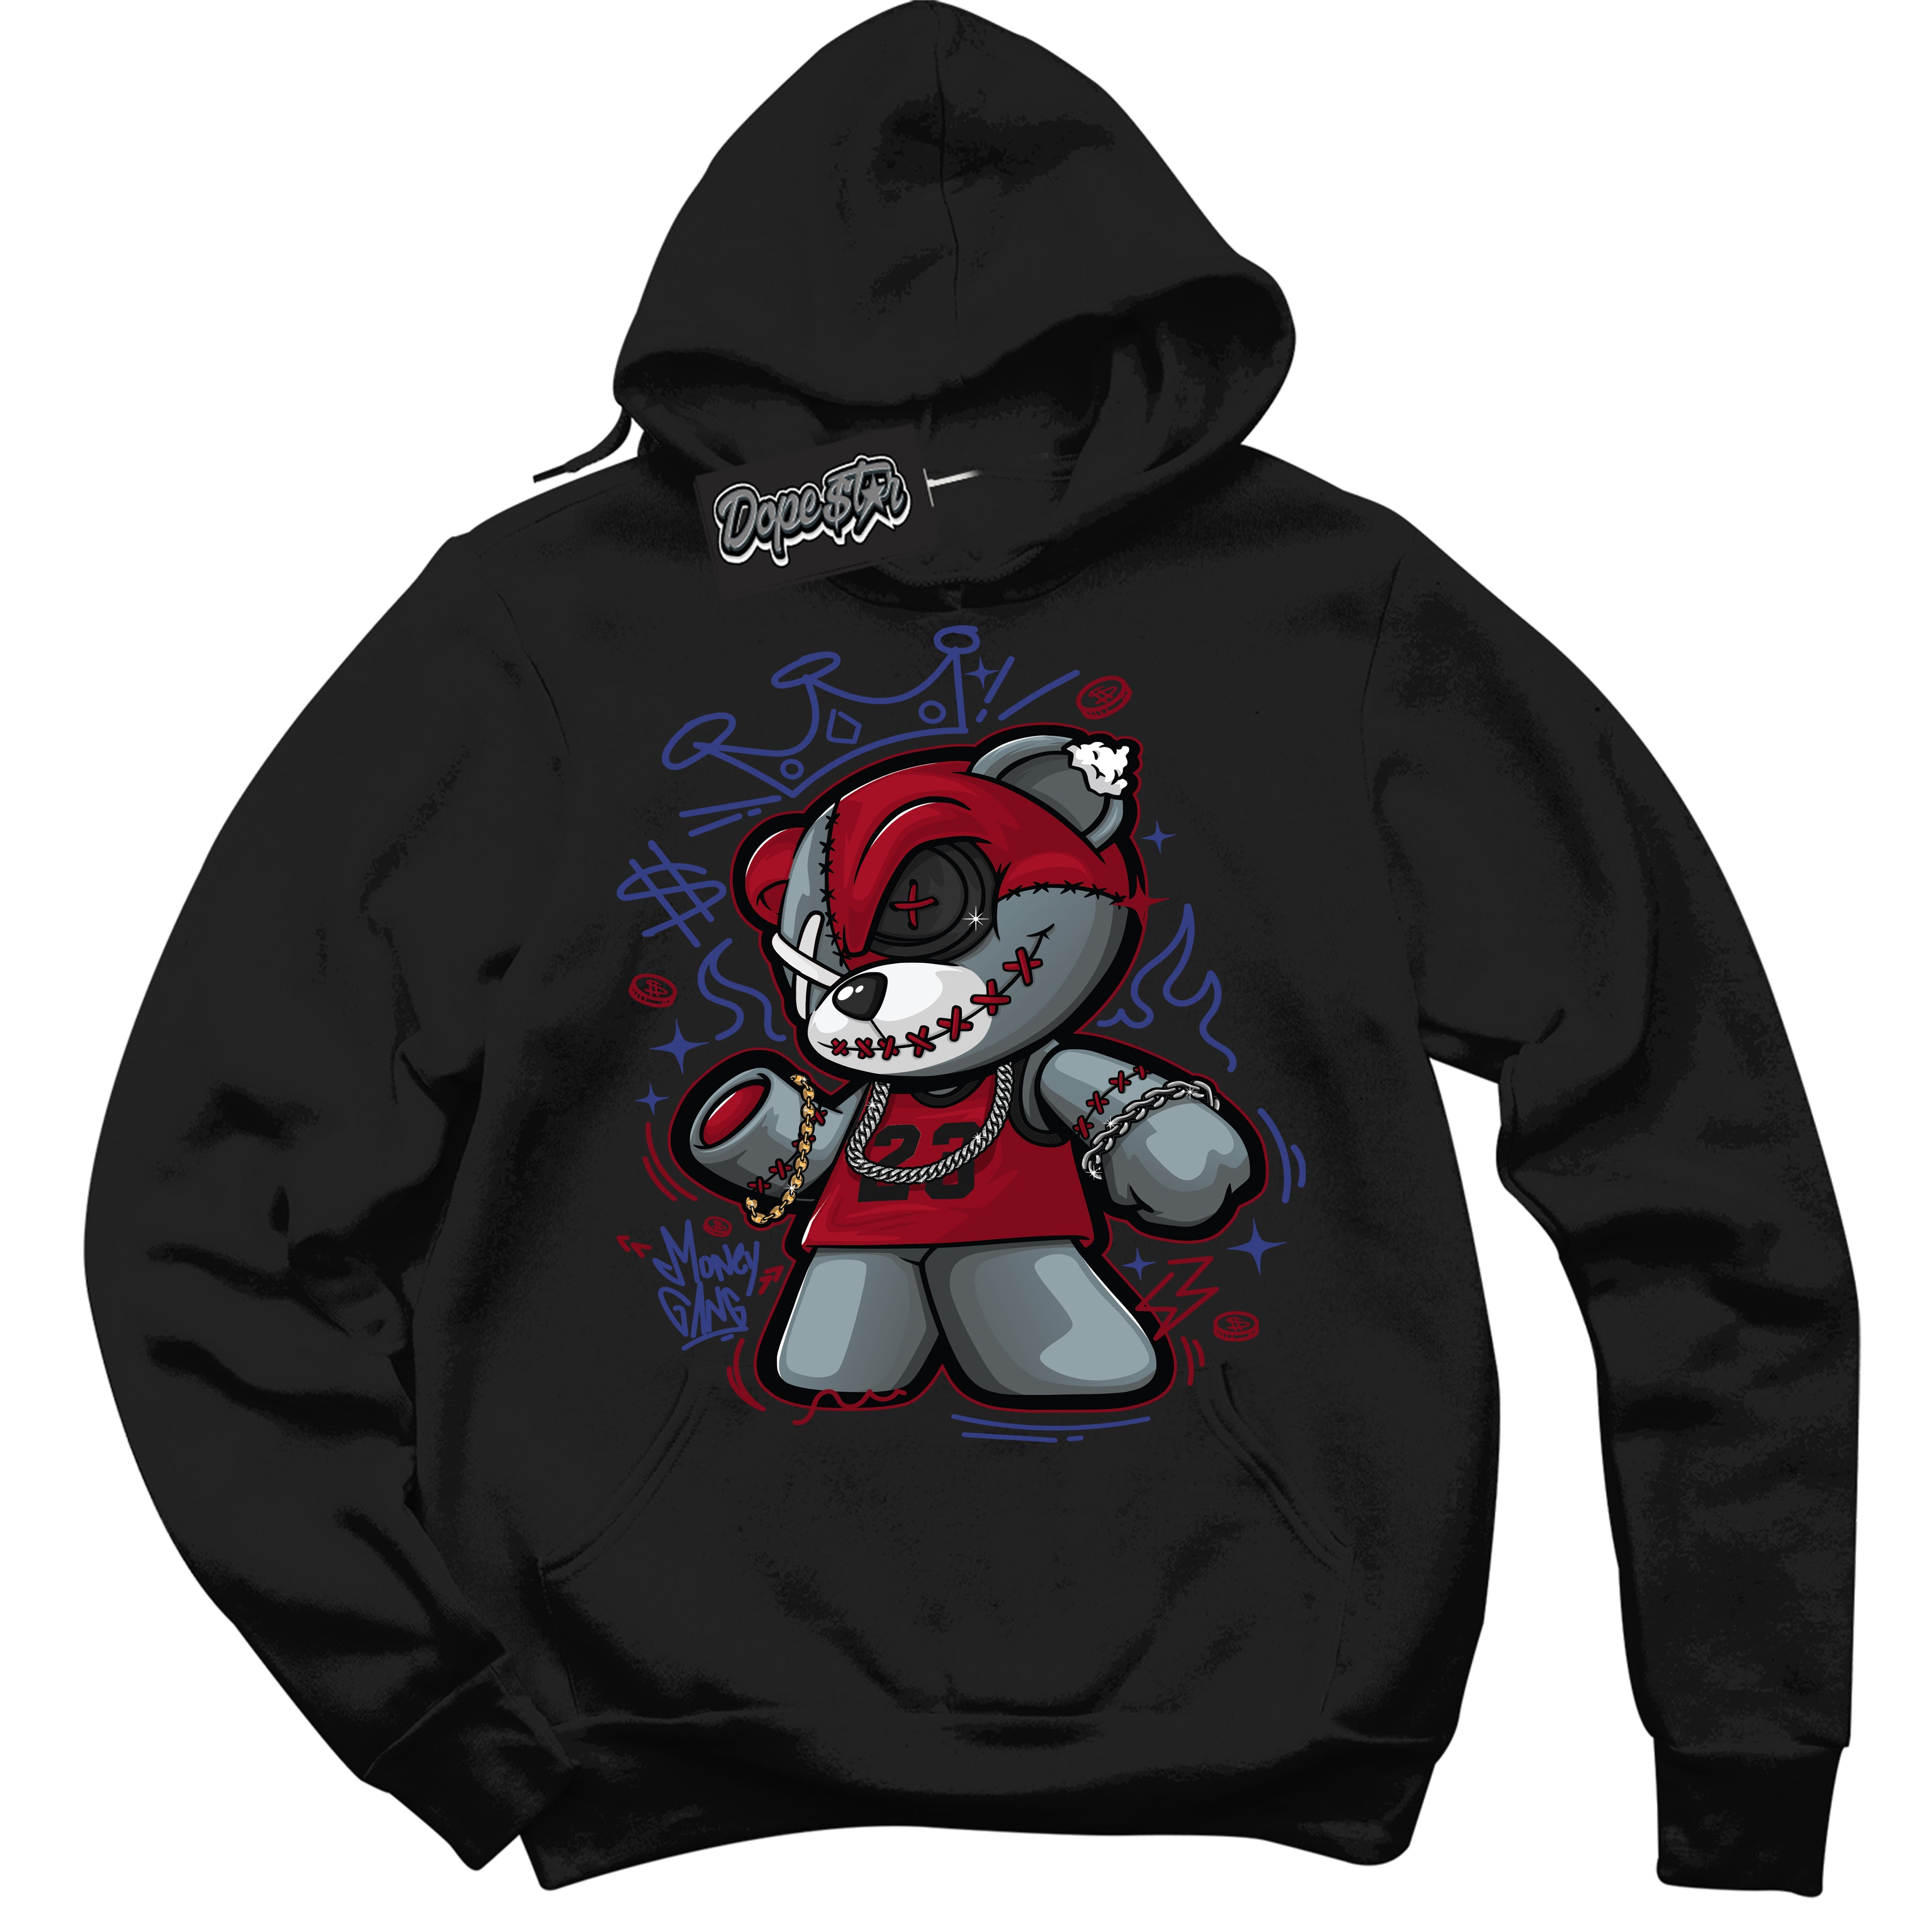 Cool Black Hoodie with “ Money Gang Bear ”  design that Perfectly Matches Playoffs 8s Sneakers.